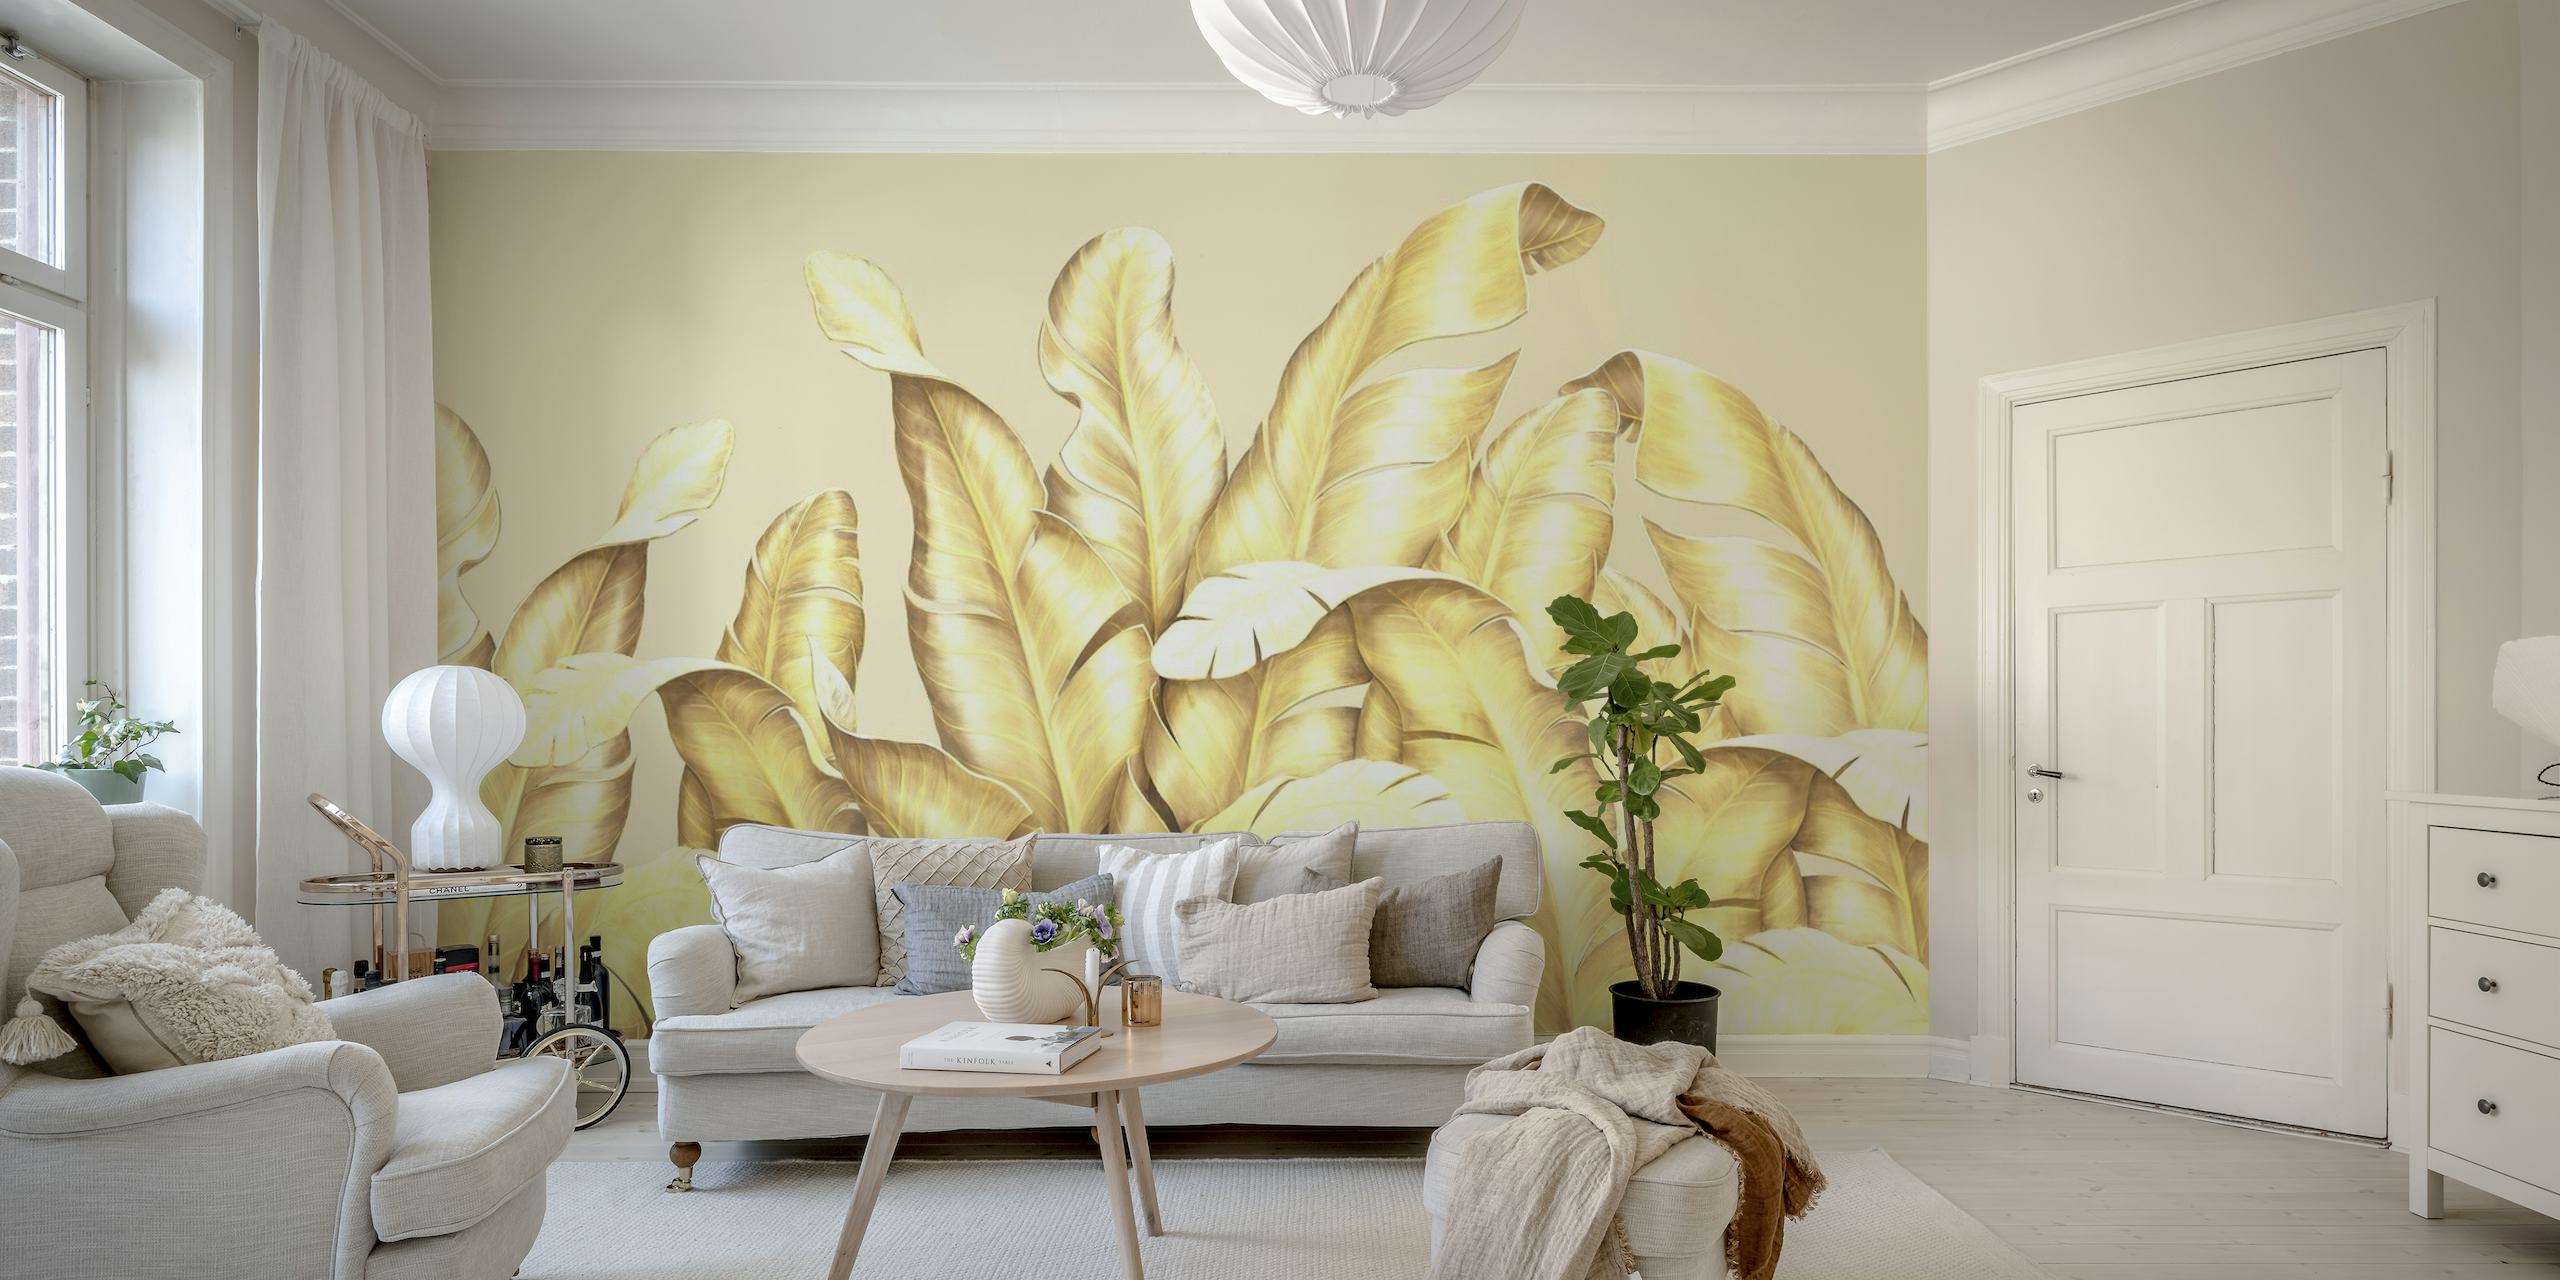 Elegant golden leaves wall mural on a neutral background